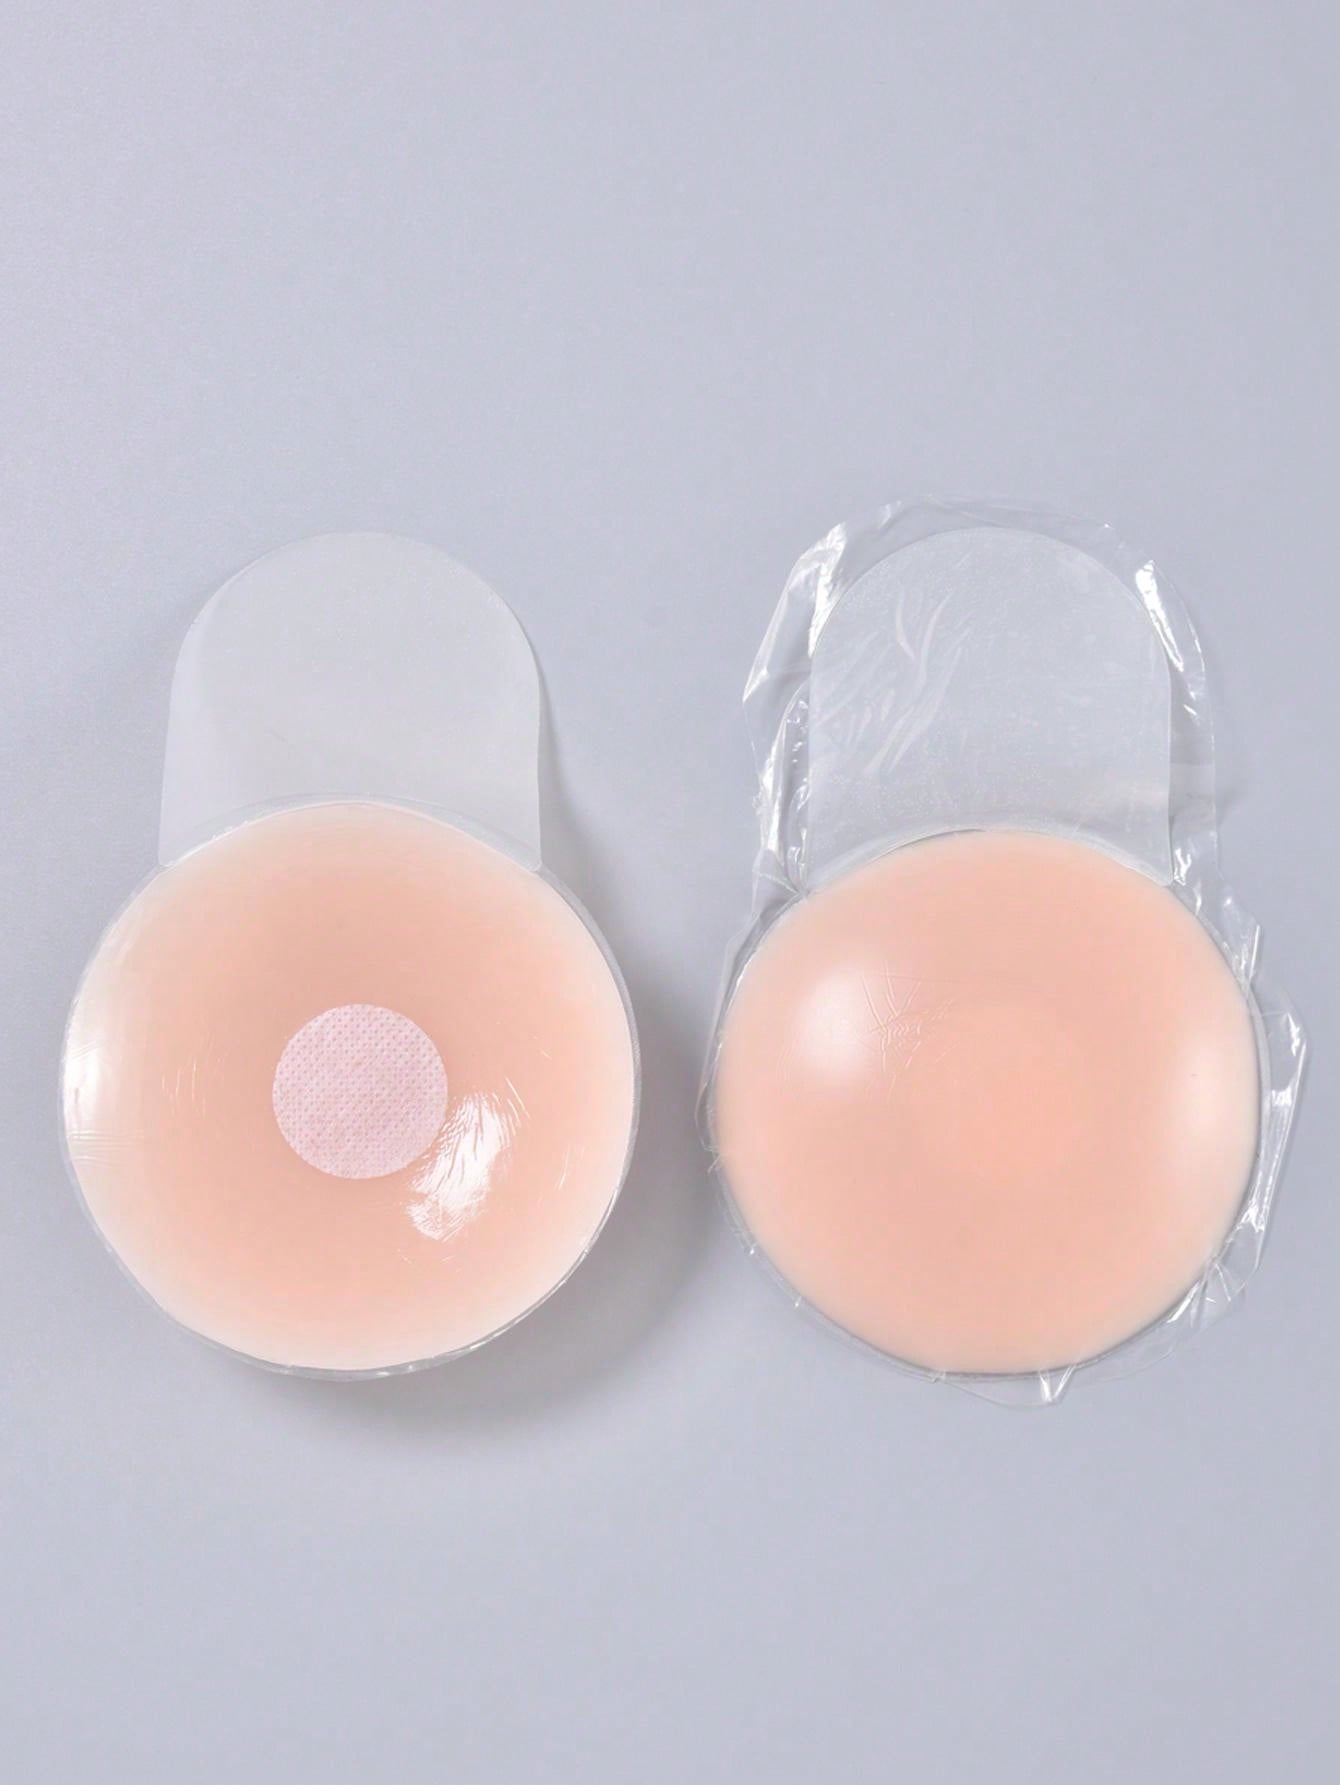 10cm Diameter Large Breast Specific Invisible Silicone Nipple Cover Anti Emptied & Gathered Breast Push Up Bra Pad For Plus Size Women - Negative Apparel